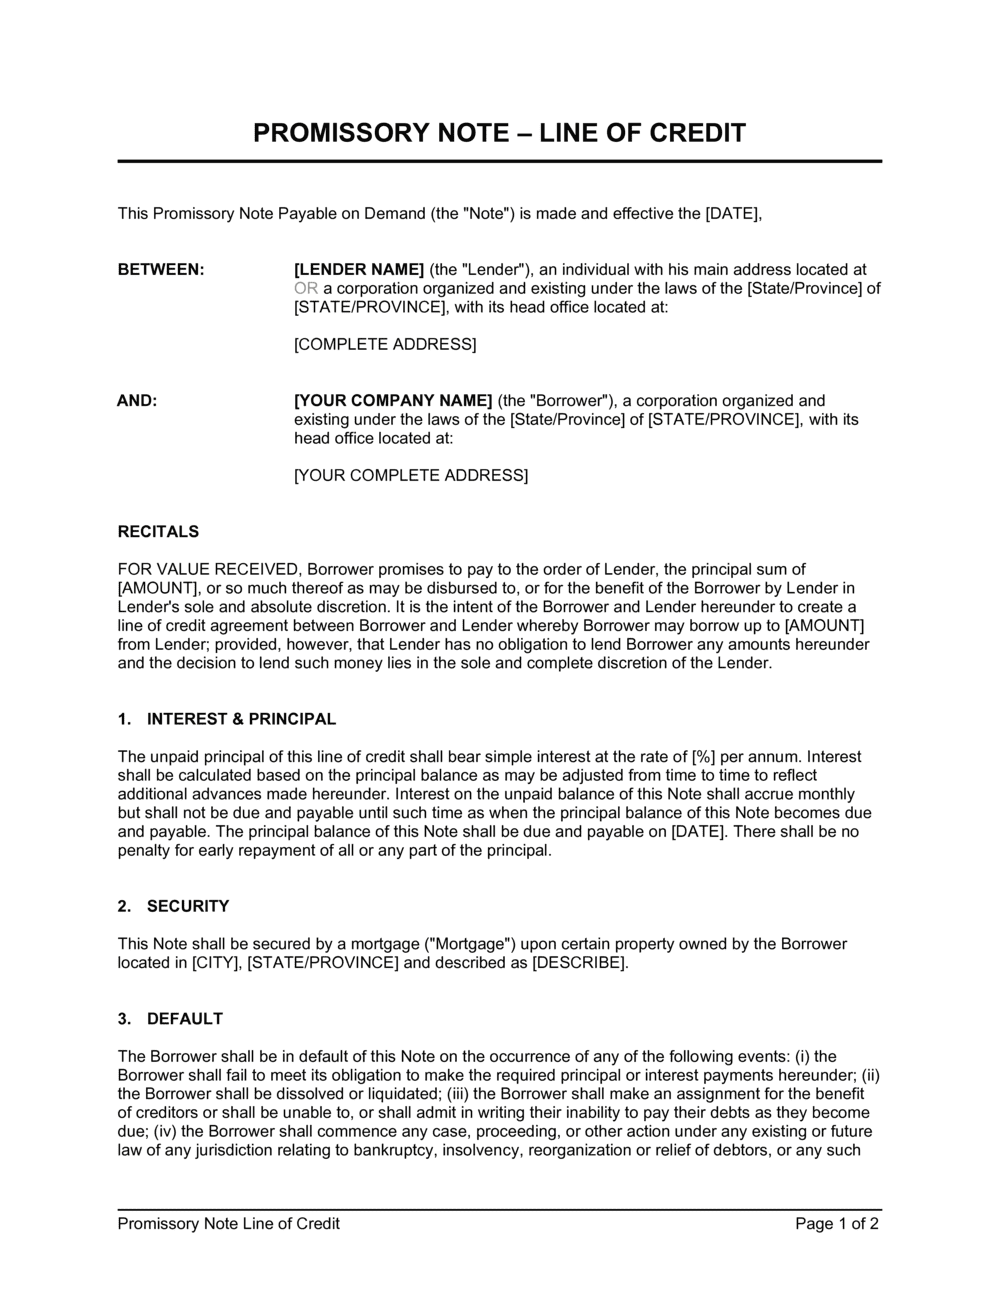 Promissory Note Line of Credit Template  by Business-in-a-Box™ For line of credit loan agreement template